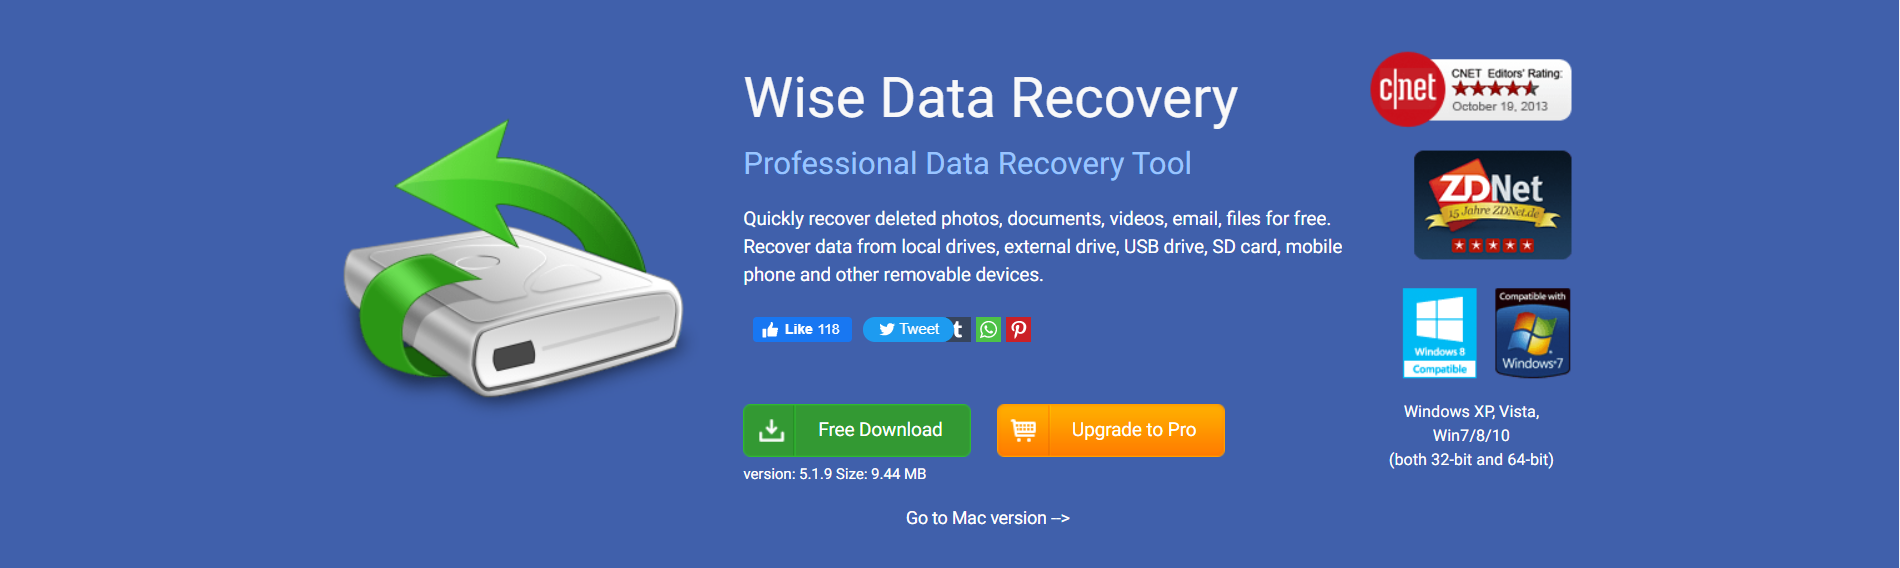 wise data recovery home page